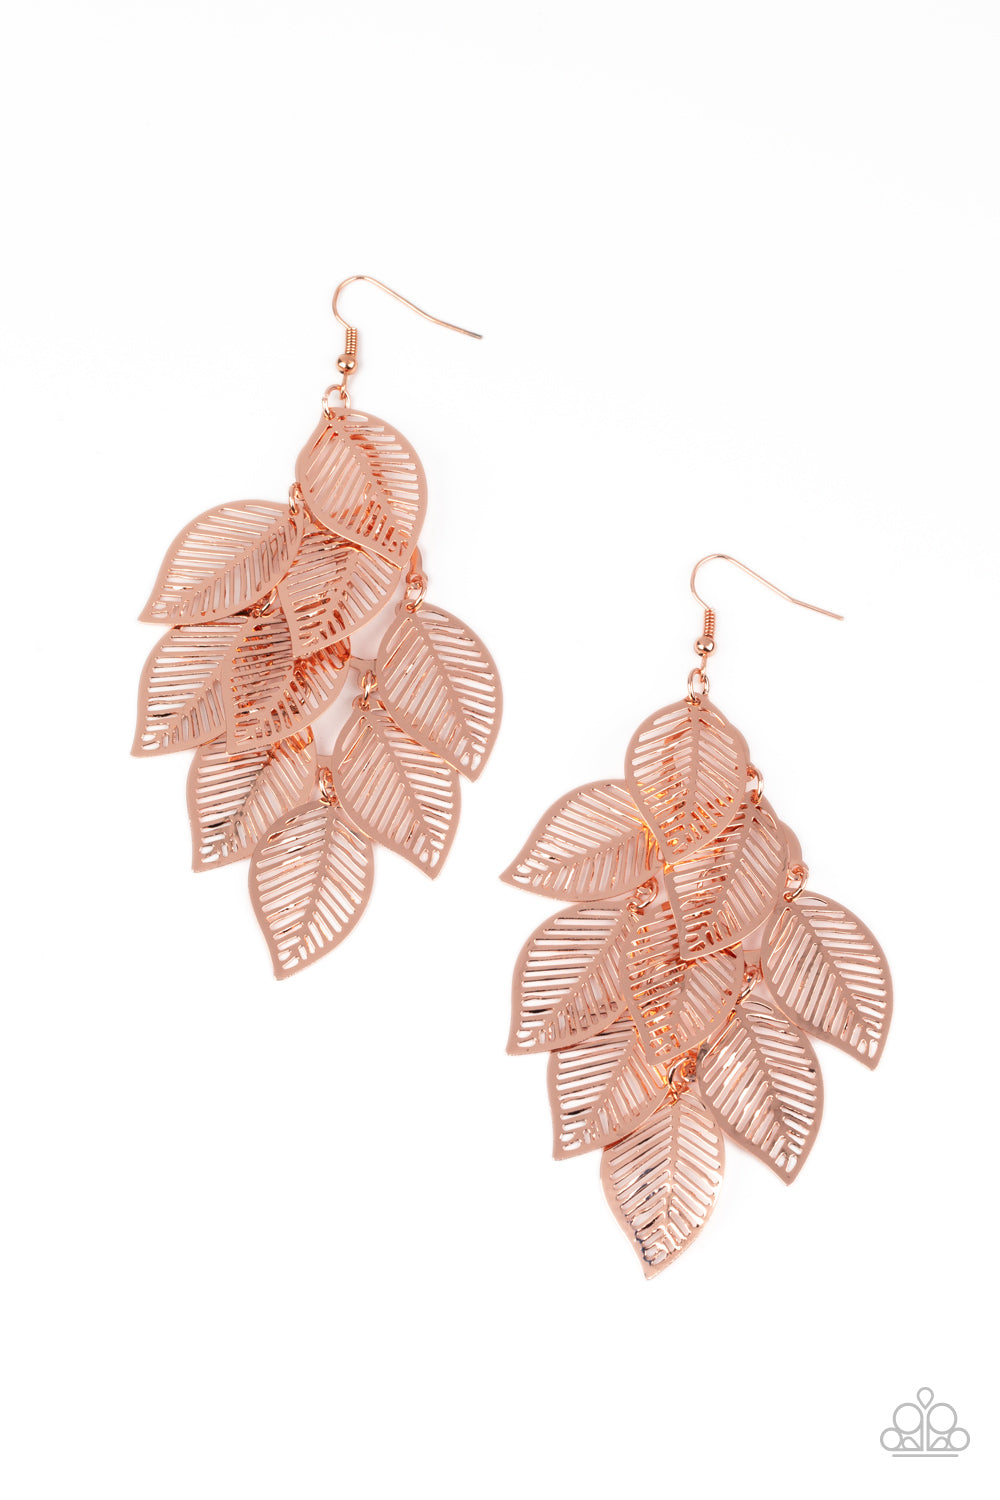 Paparazzi Accessories - Limitlessly Leafy #E429- Copper Earrings